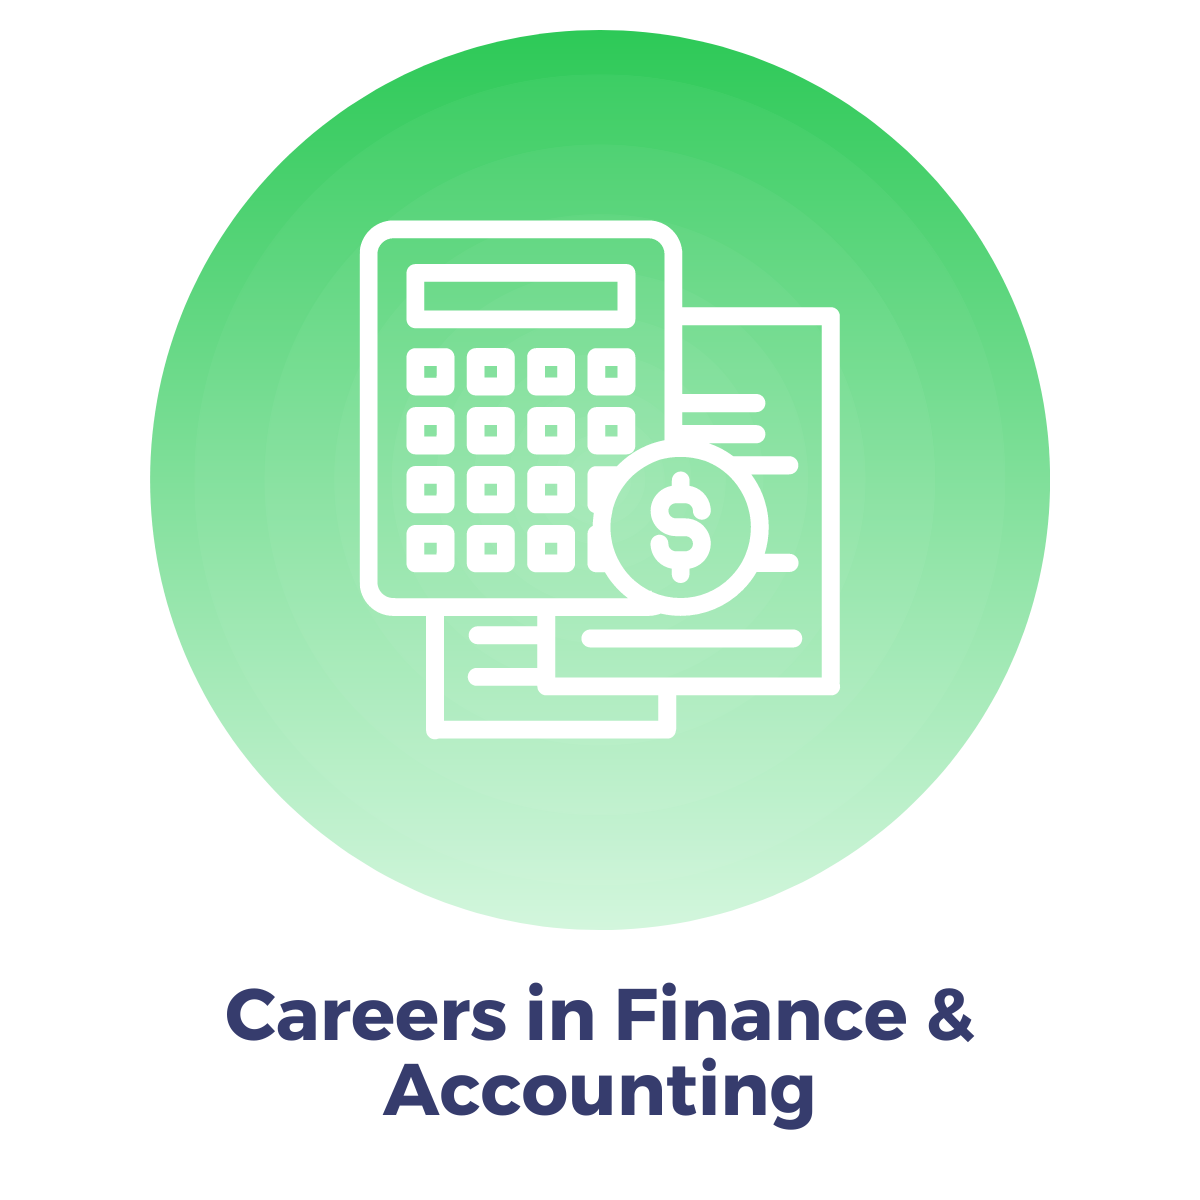 Careers in Finance & Accounting